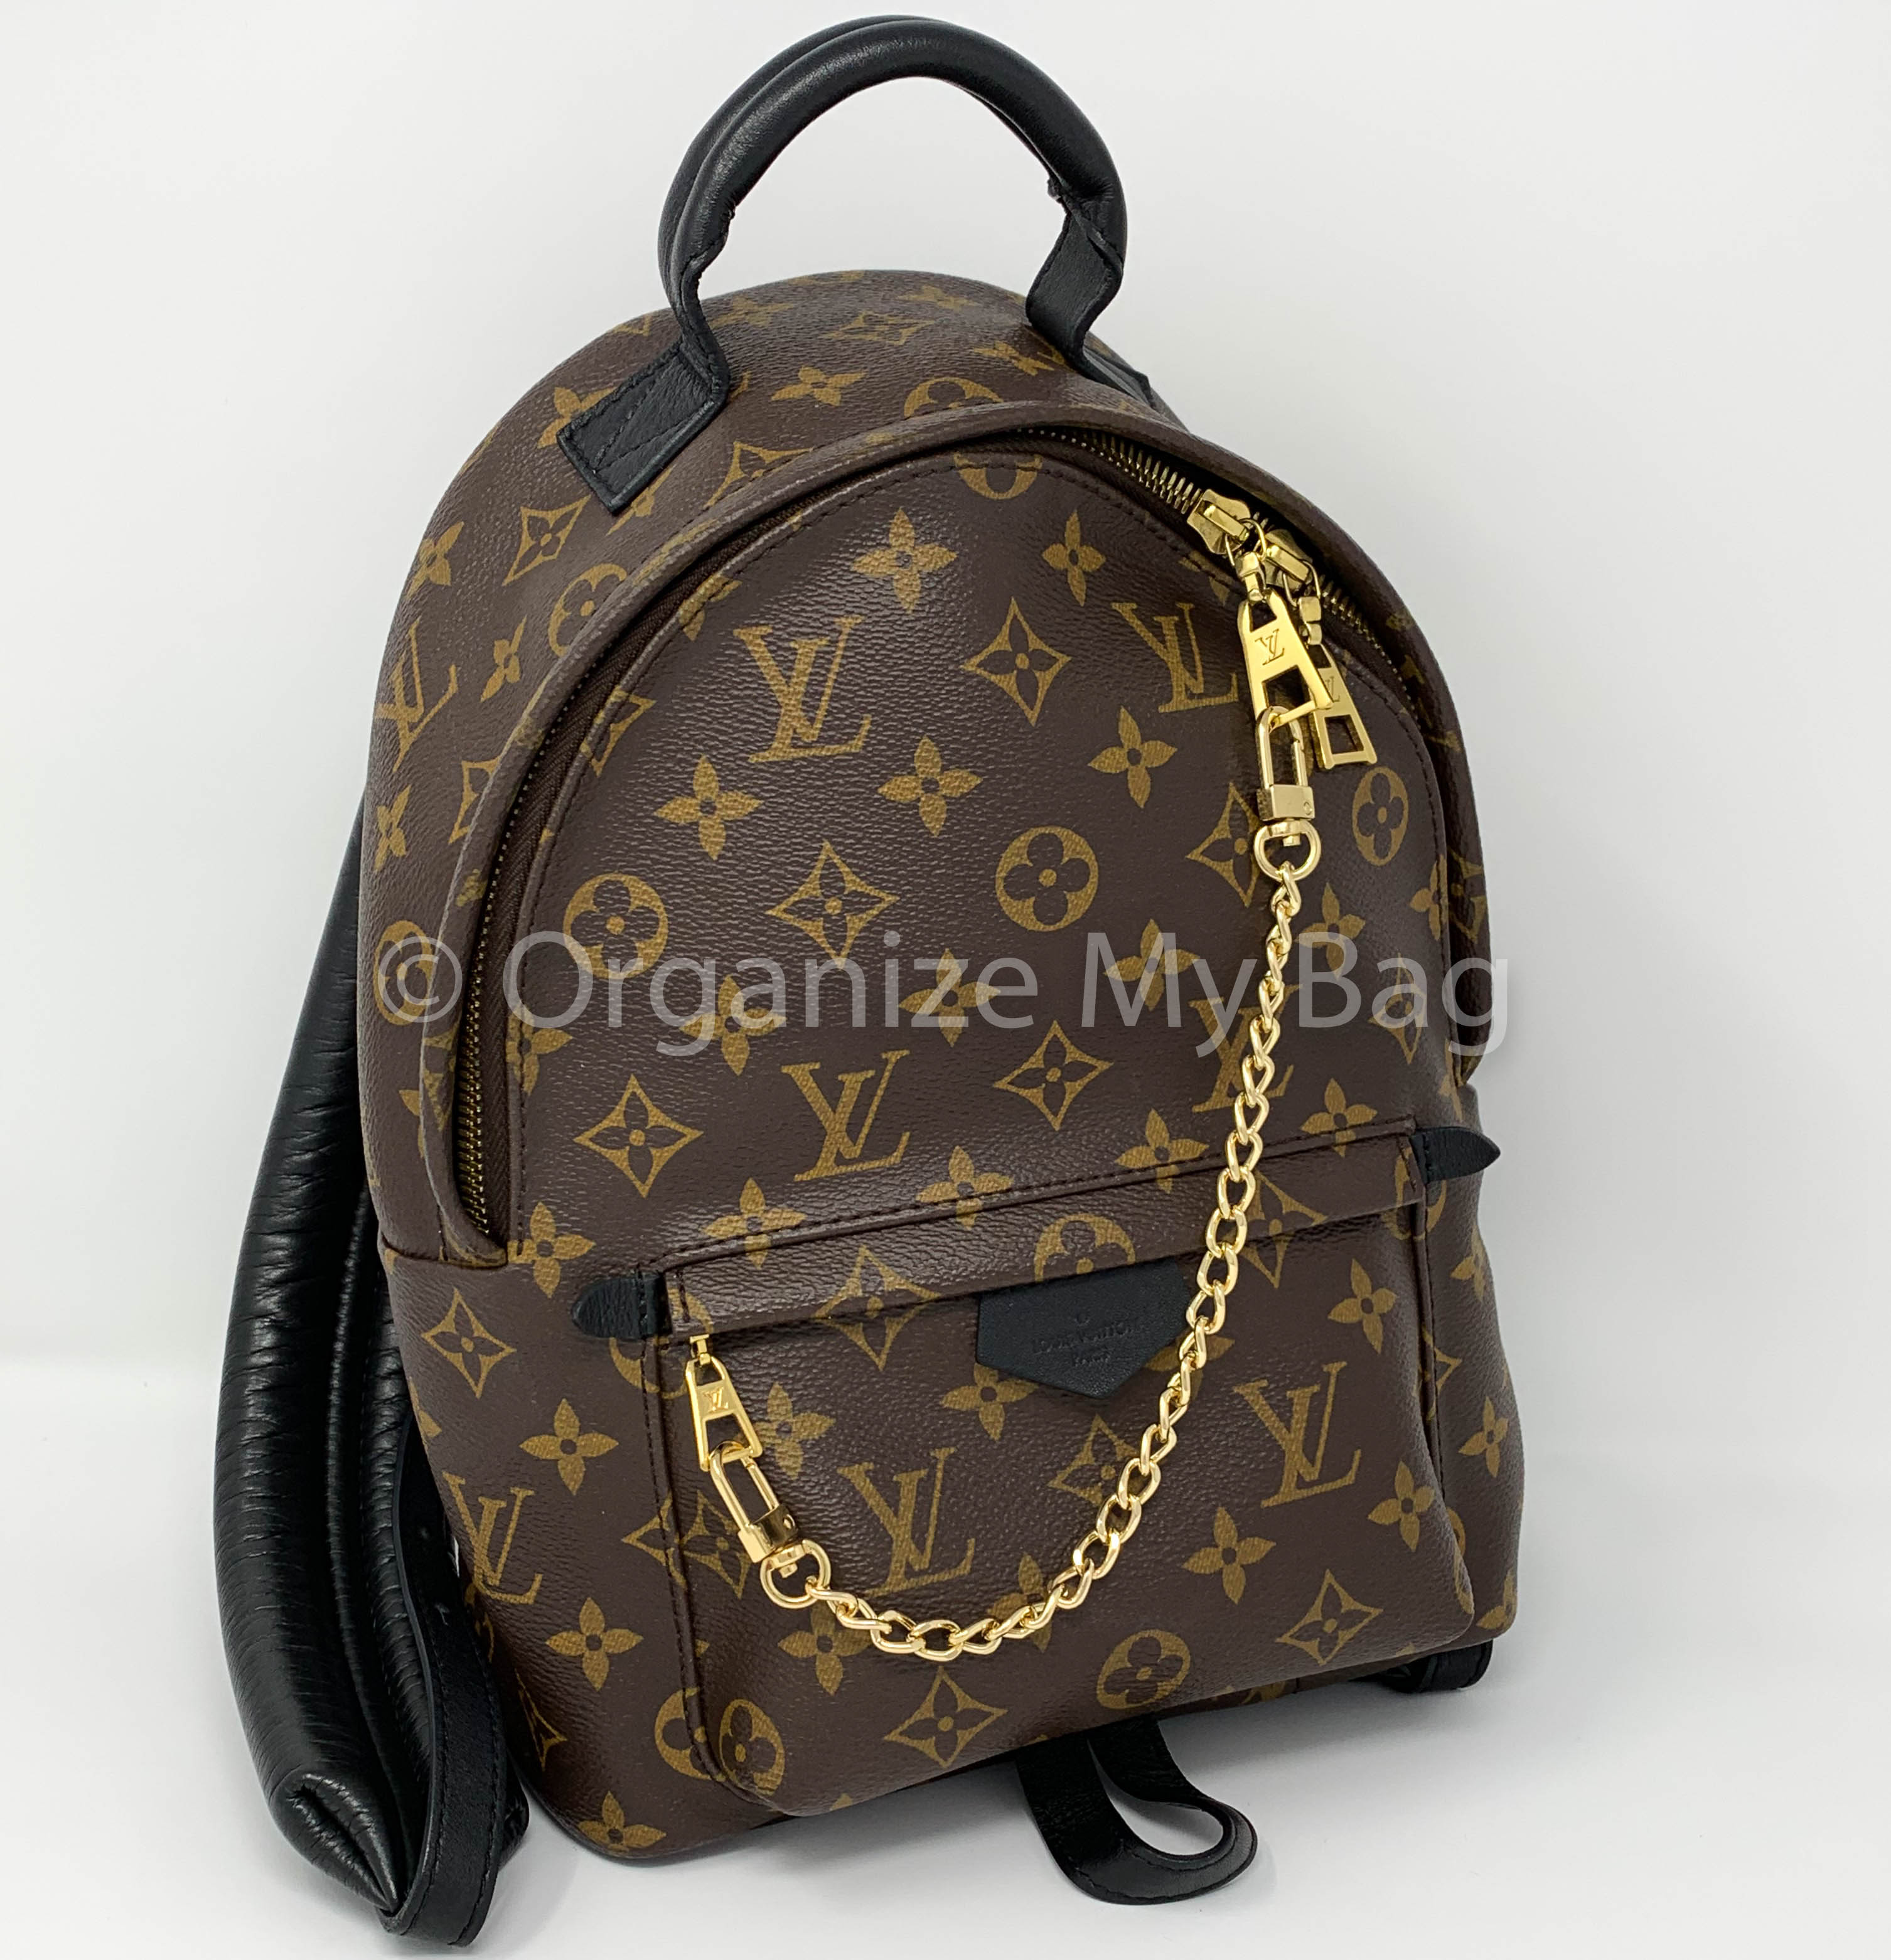 Dress Up Your Louis Vuitton Bags With Extra Shiny Charms